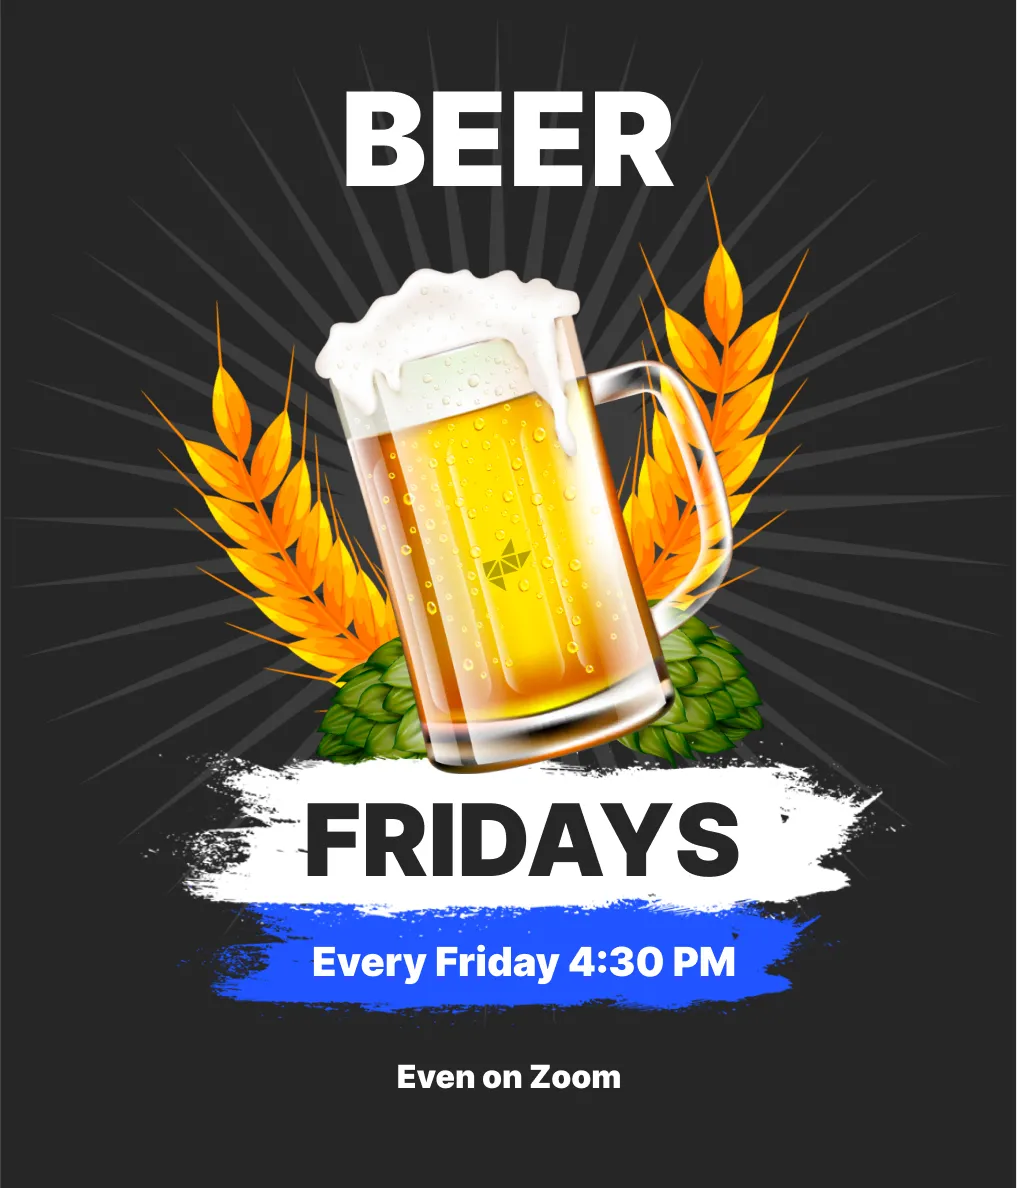 Beers on friday for every friday even on zoom.